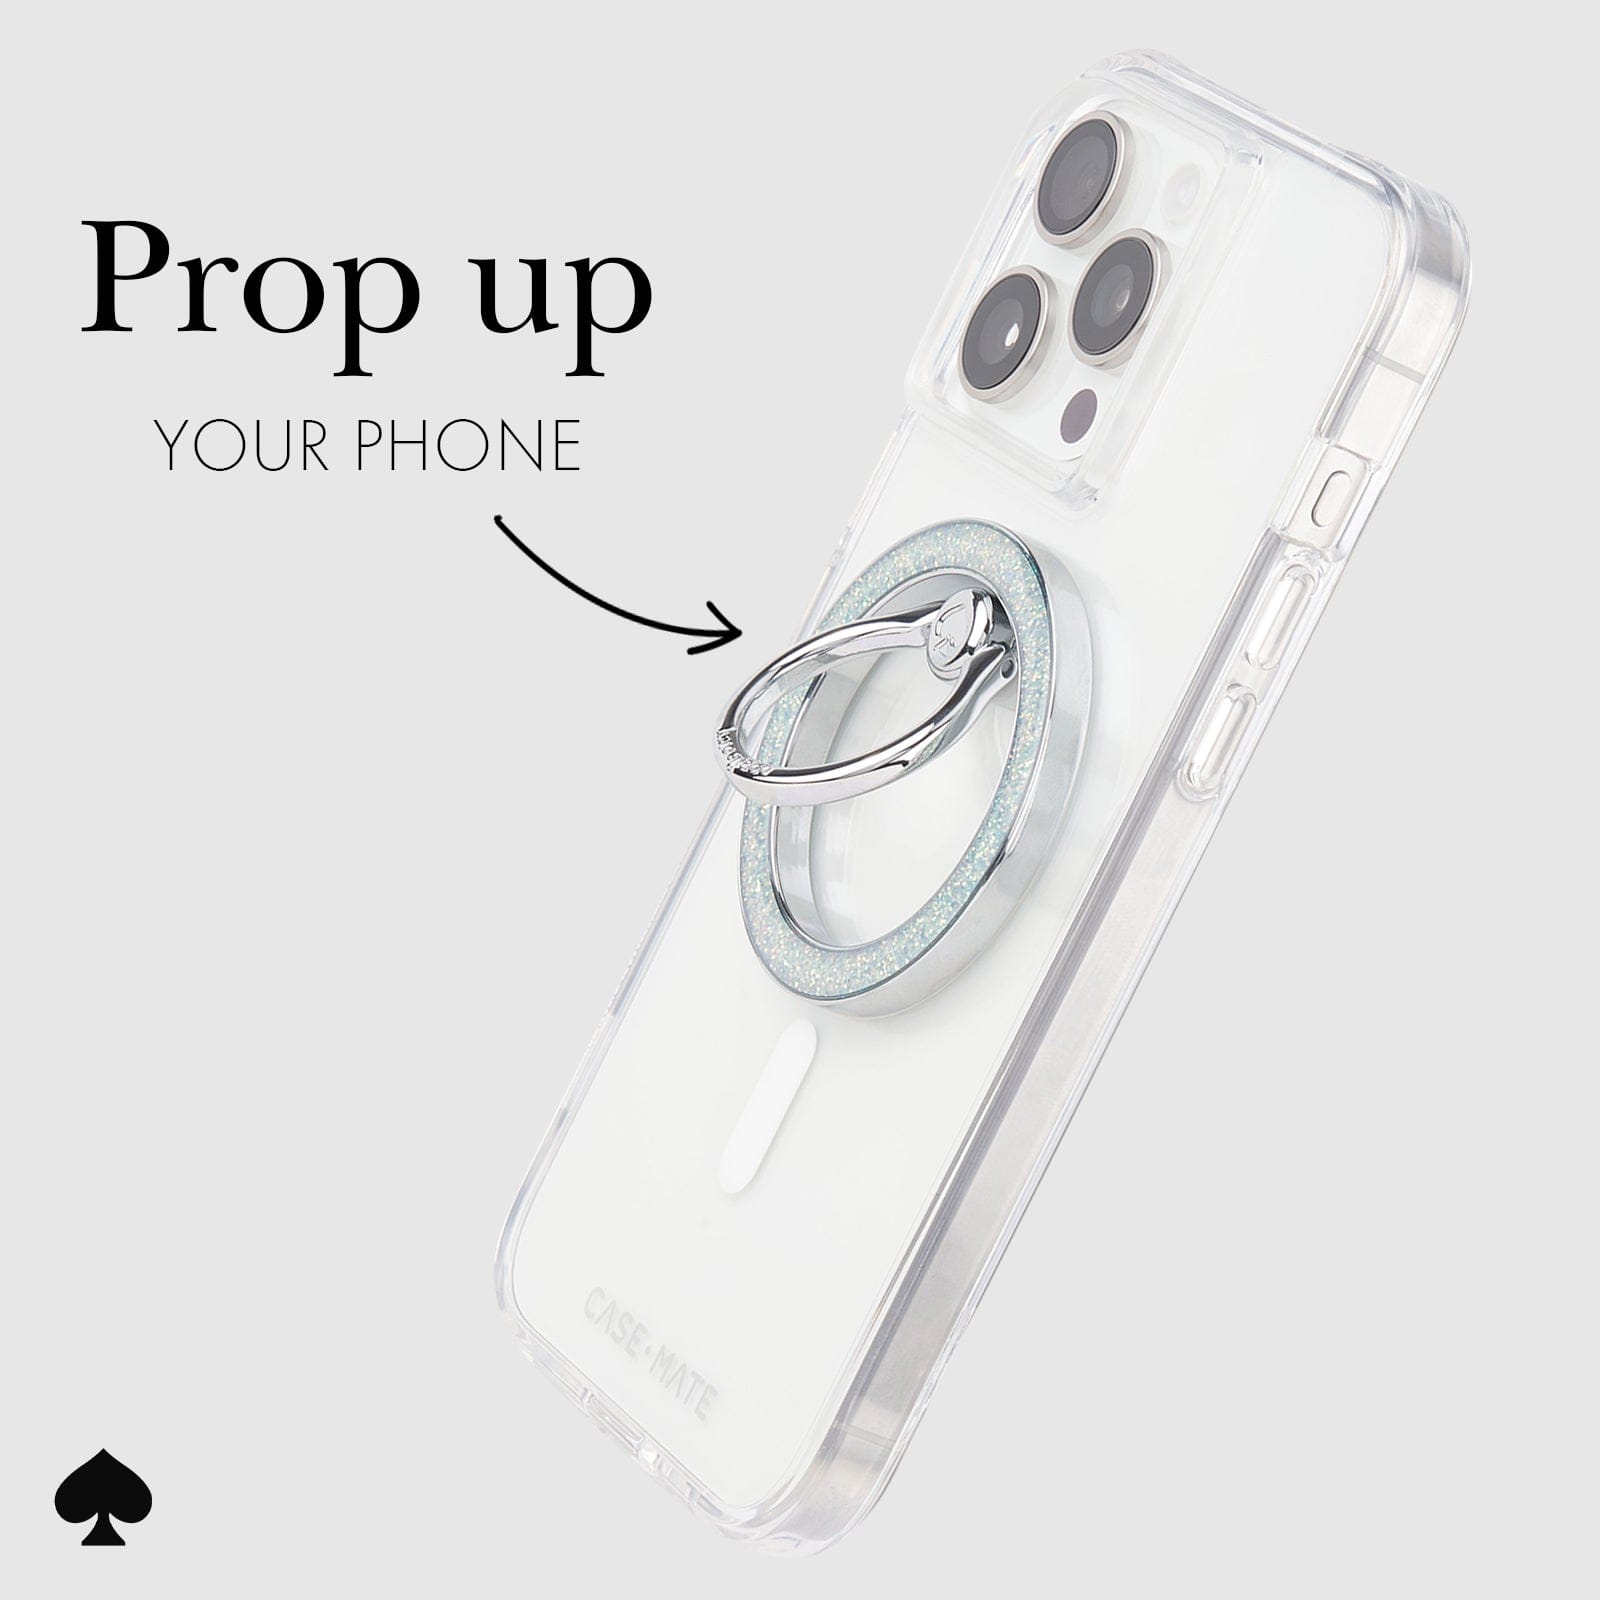 PROP UP YOUR PHONE